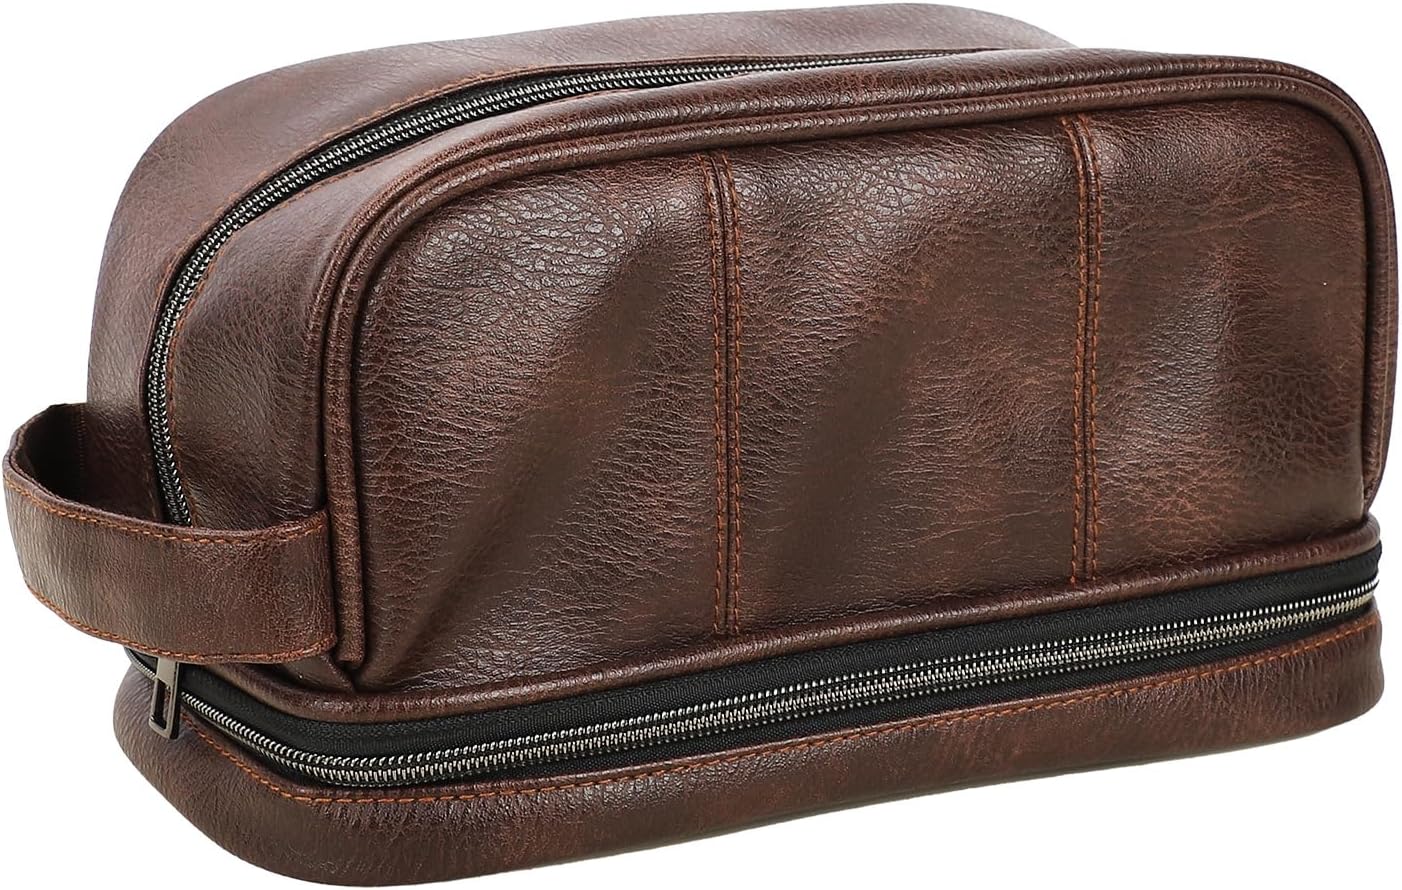 emissary Leather Men’s Travel Toiletry Bag